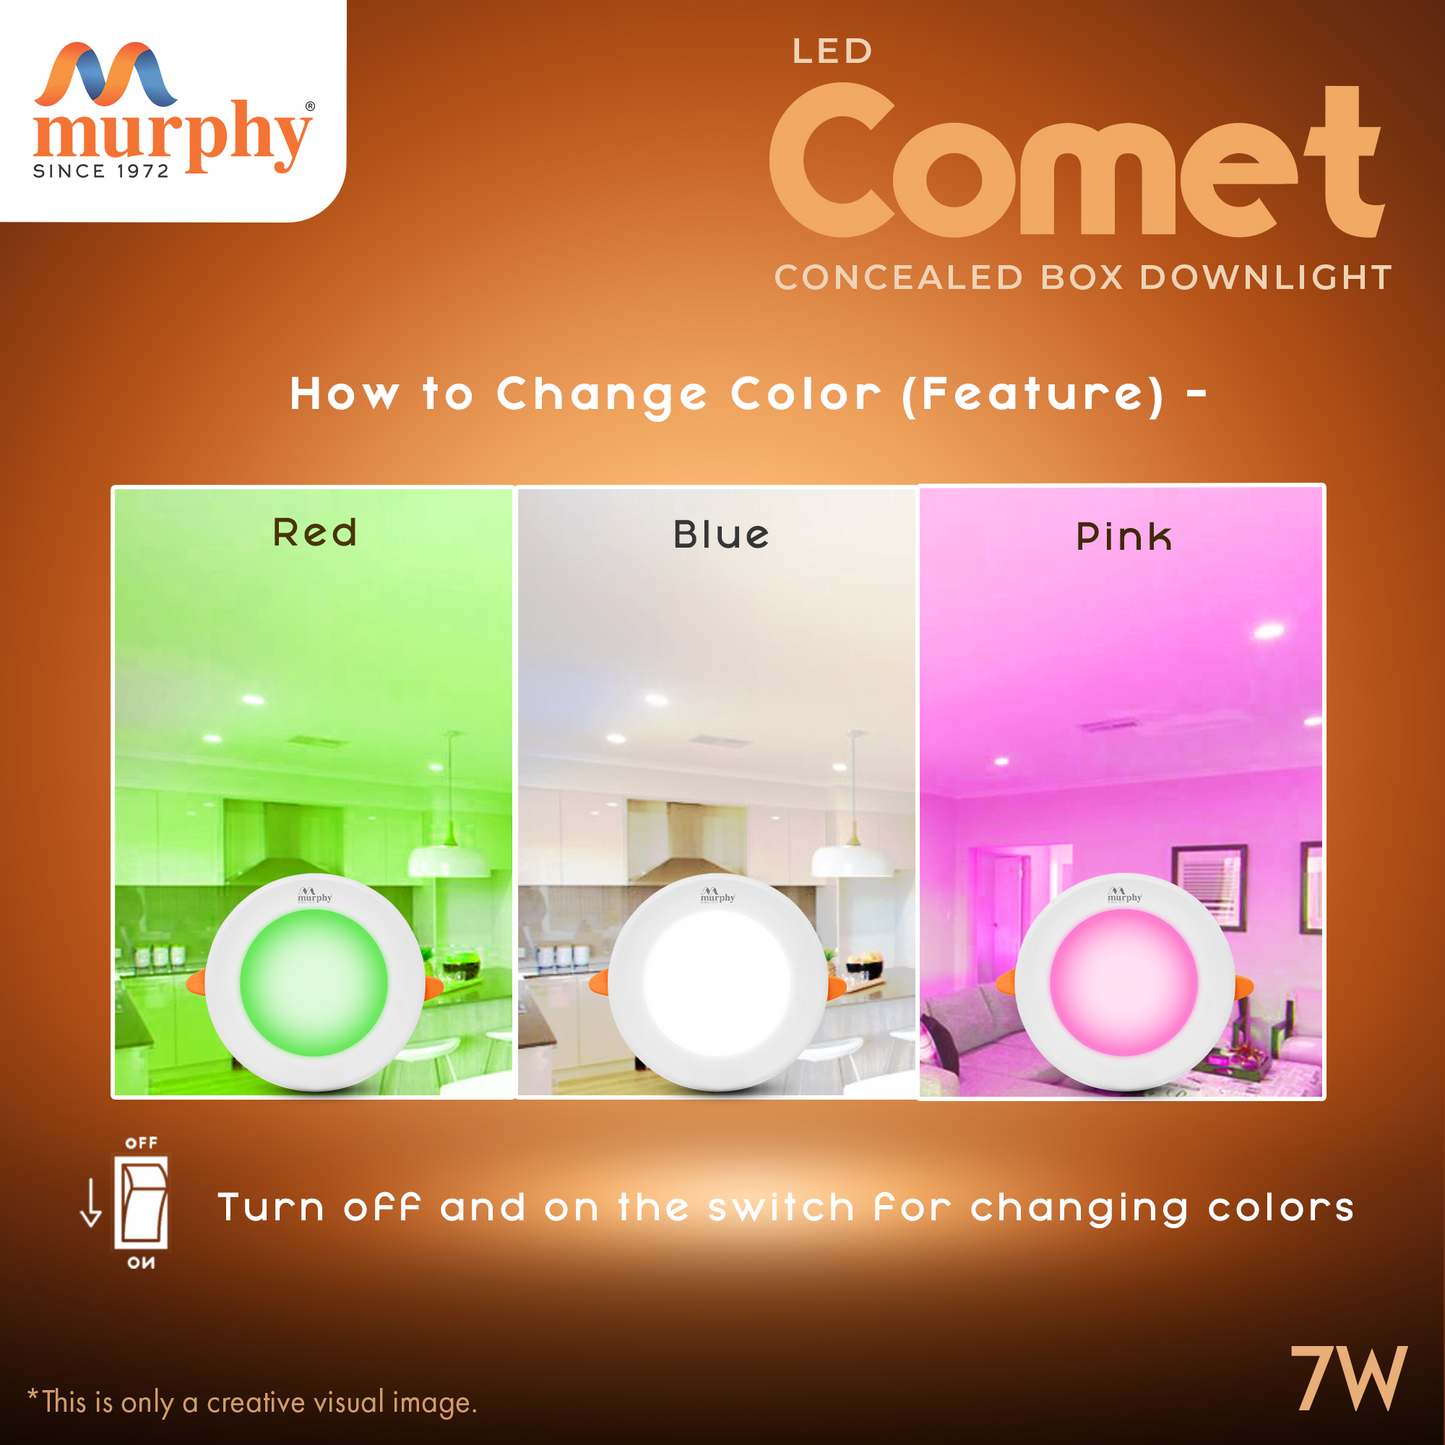 Murphy 7W Comet LED 3-IN-1 Color Changing Down Light : Cool White+ Green+ Pink